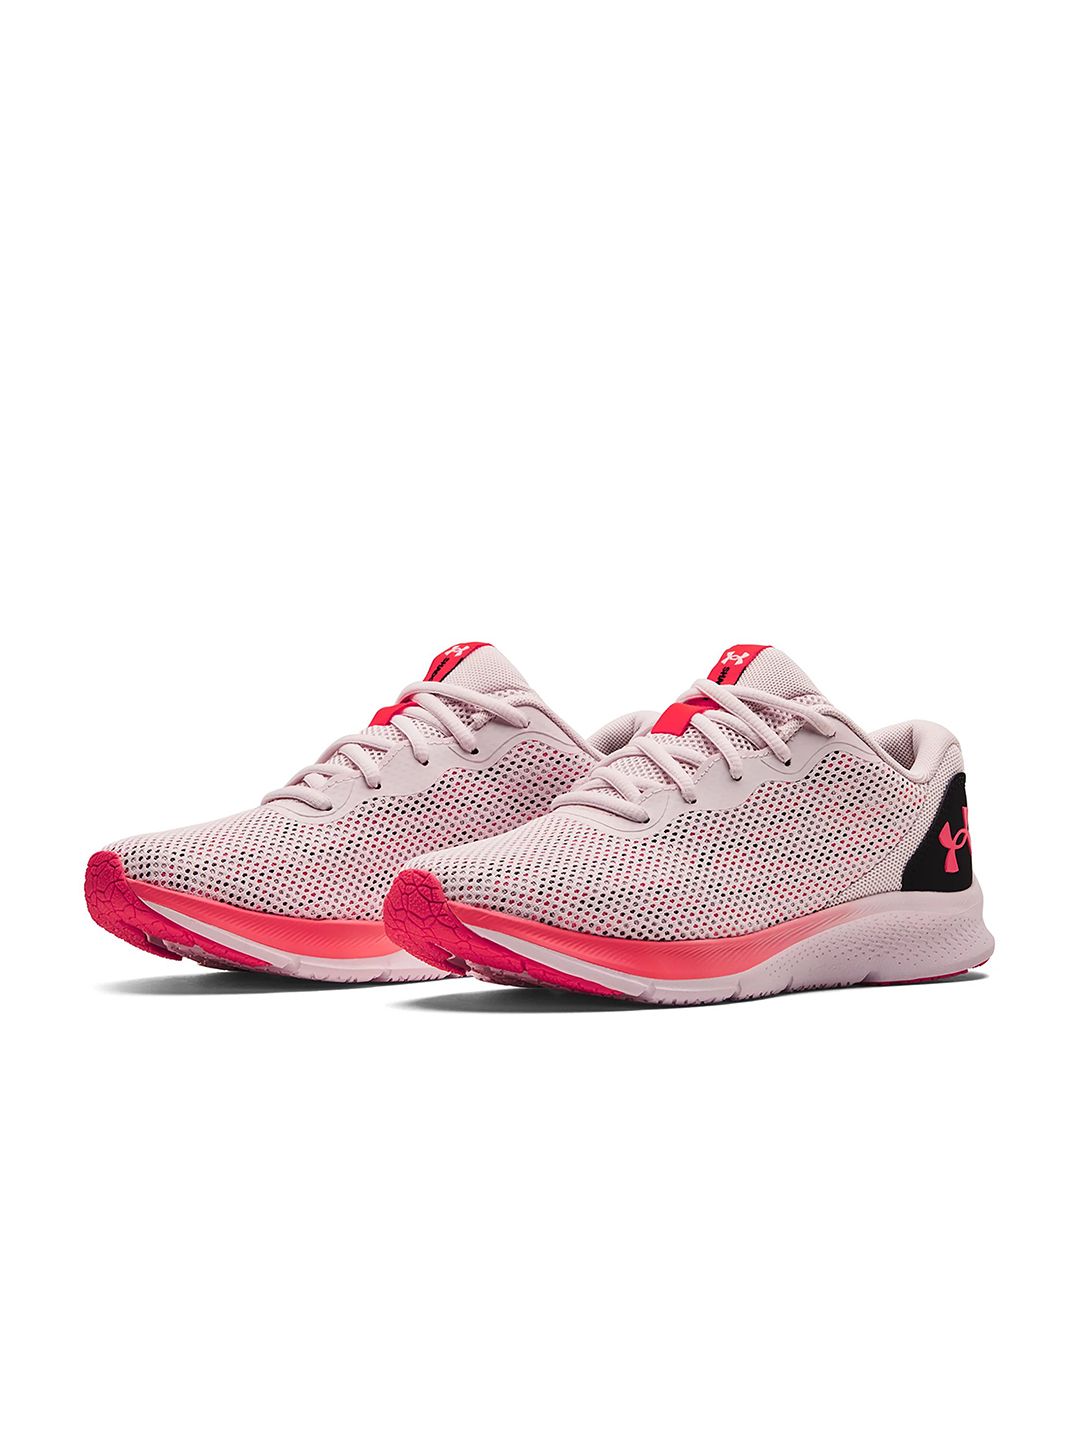 UNDER ARMOUR Women Pink & White Shadow Running Shoes Price in India